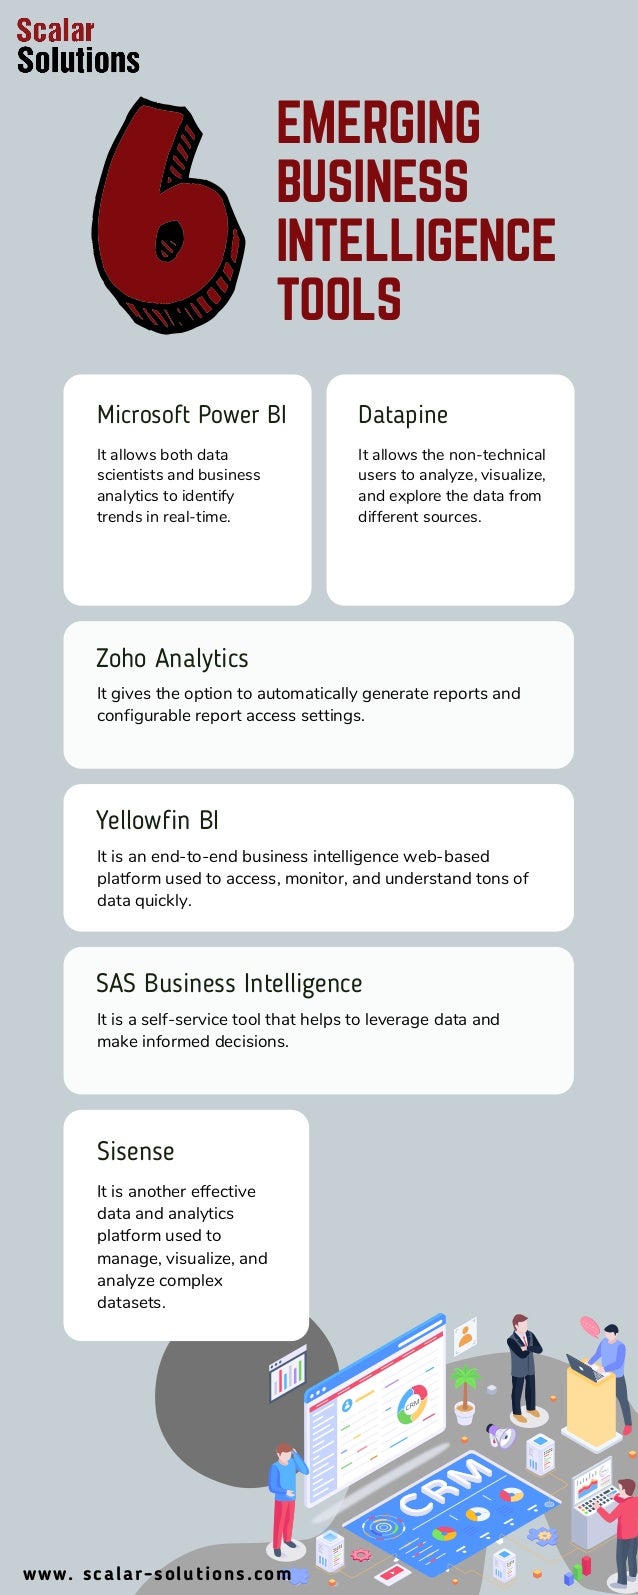 EMERGING
BUSINESS
INTELLIGENCE
TOOLS
Sisense
It is another effective
data and analytics
platform used to
manage, visualize, and
analyze complex
datasets.
www. scalar-solutions.com
Zoho Analytics
It gives the option to automatically generate reports and
configurable report access settings.
Yellowfin BI
It is an end-to-end business intelligence web-based
platform used to access, monitor, and understand tons of
data quickly.
SAS Business Intelligence
It is a self-service tool that helps to leverage data and
make informed decisions.
Microsoft Power BI Datapine
It allows both data
scientists and business
analytics to identify
trends in real-time.
It allows the non-technical
users to analyze, visualize,
and explore the data from
different sources.
 